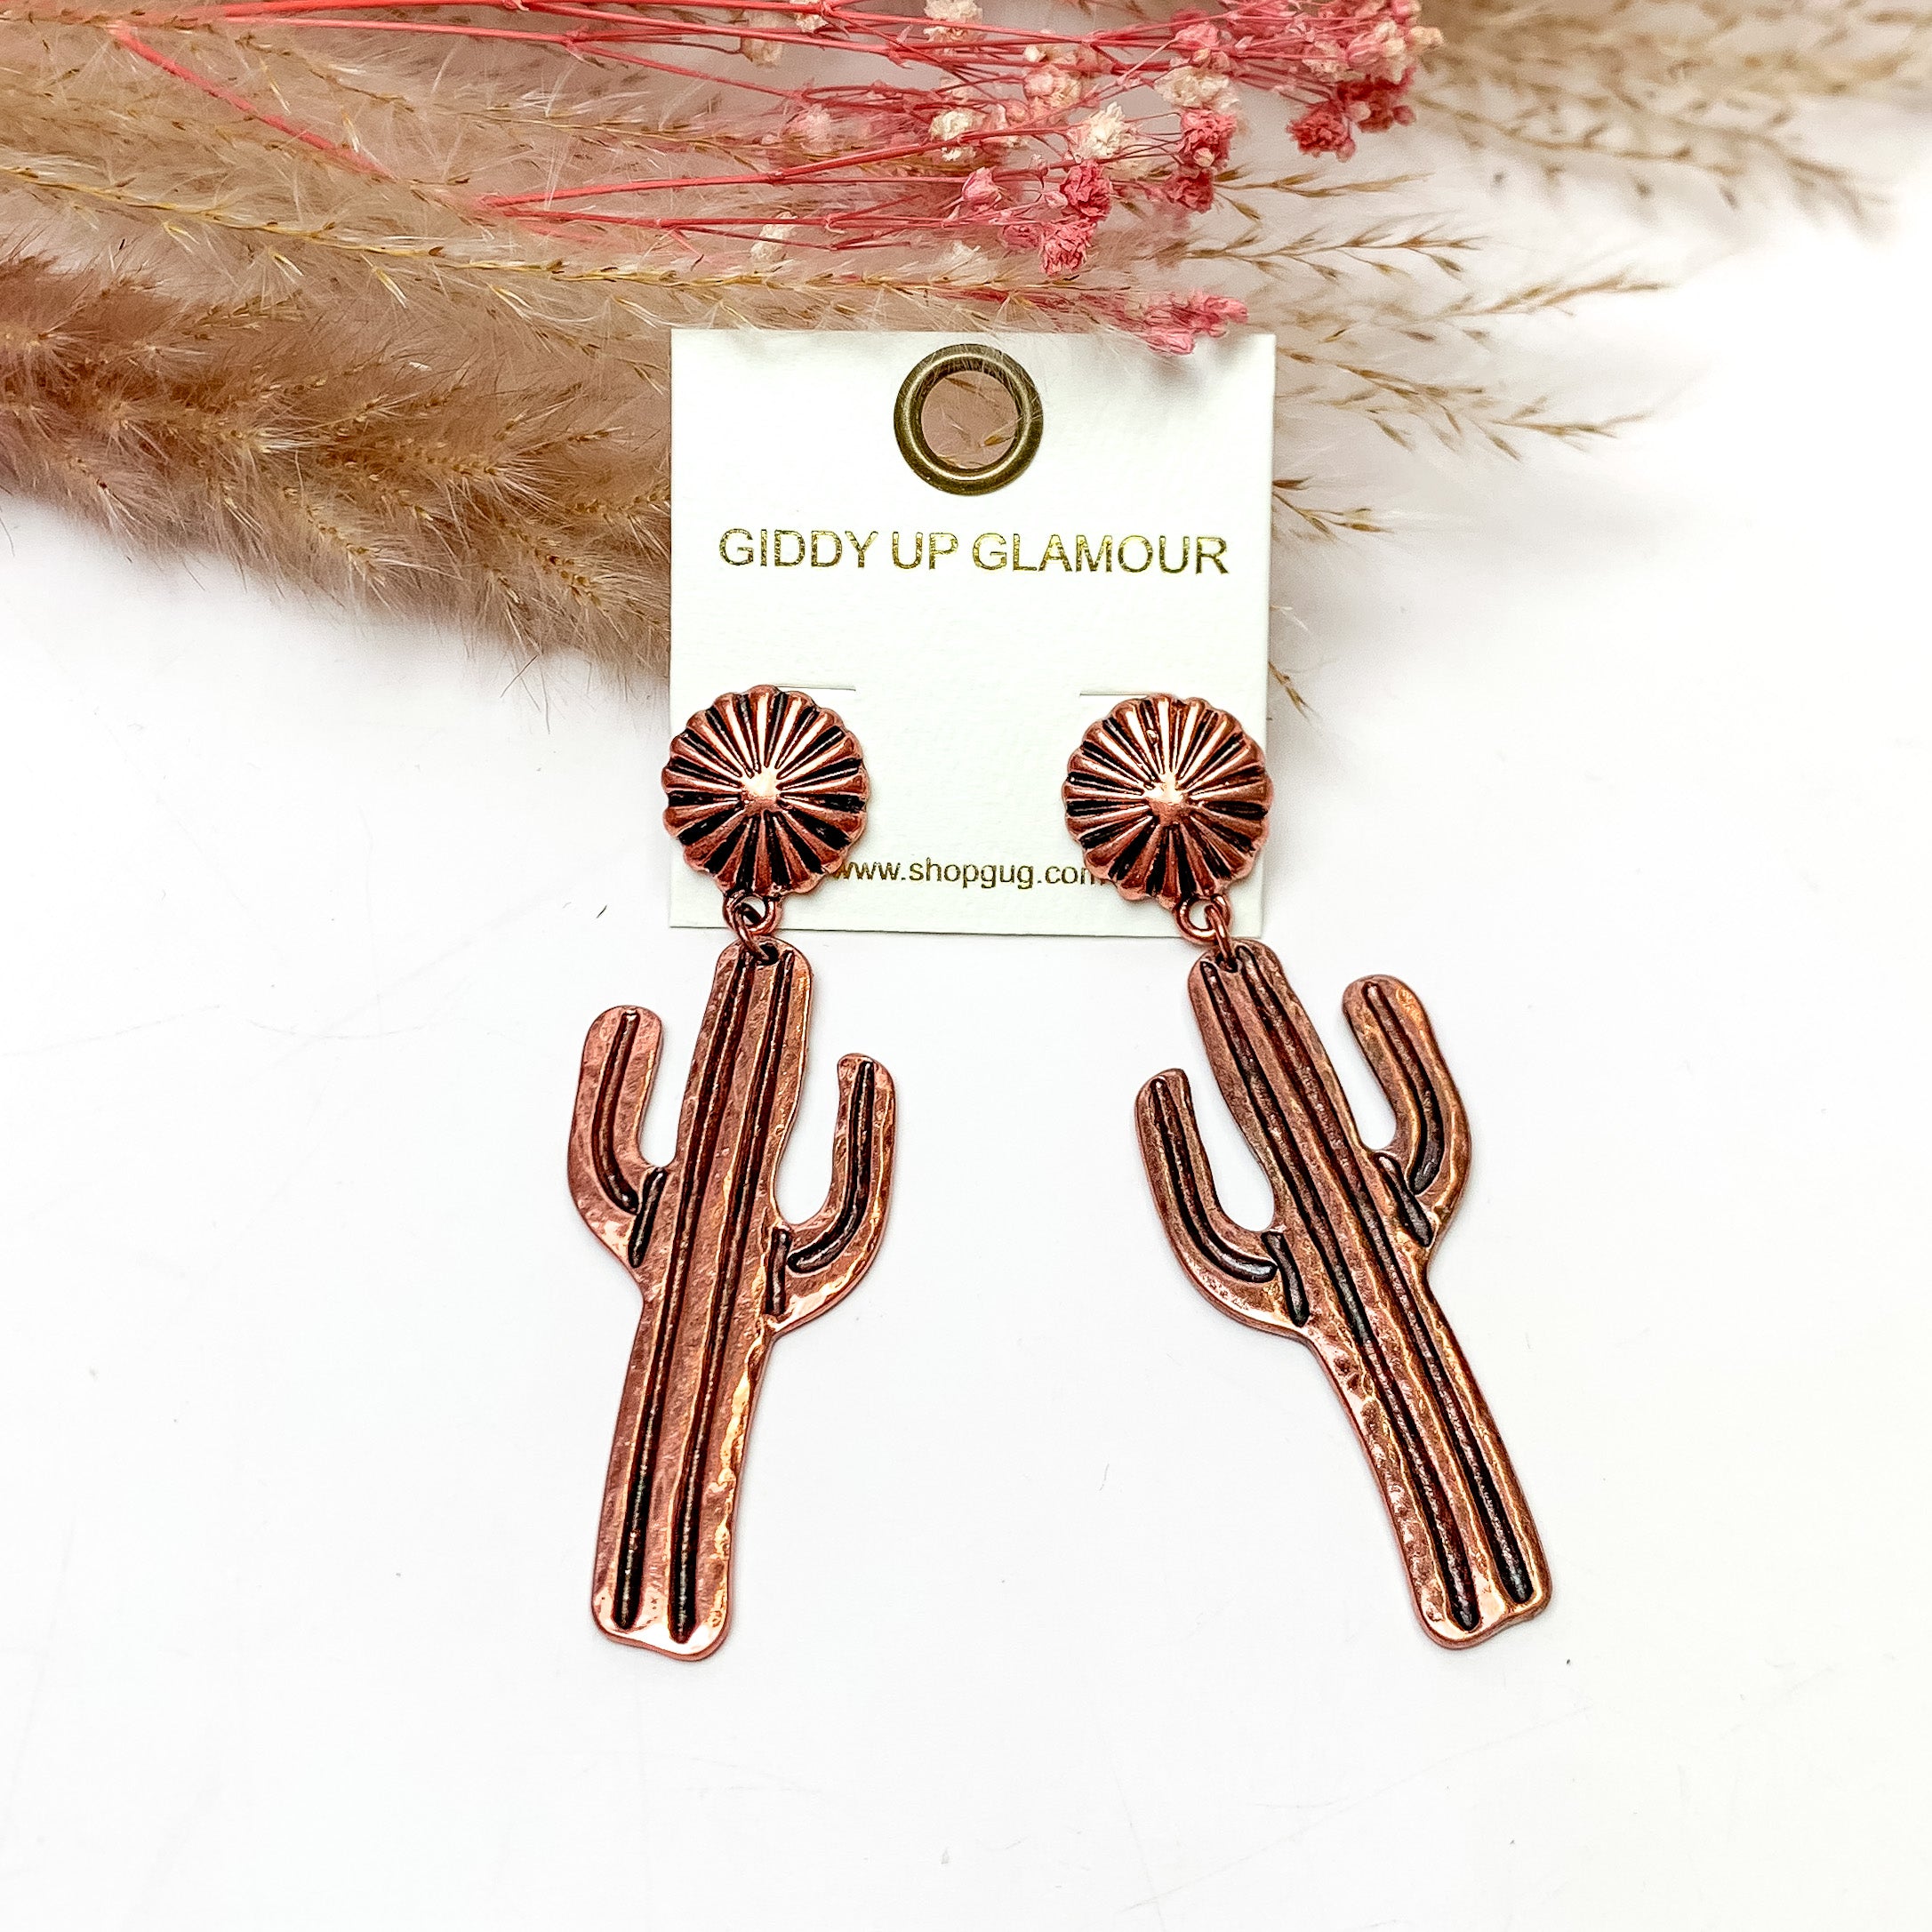 Country cactus copper tone earrings. These earrings are pictured on a white background with plants behind for decoration.